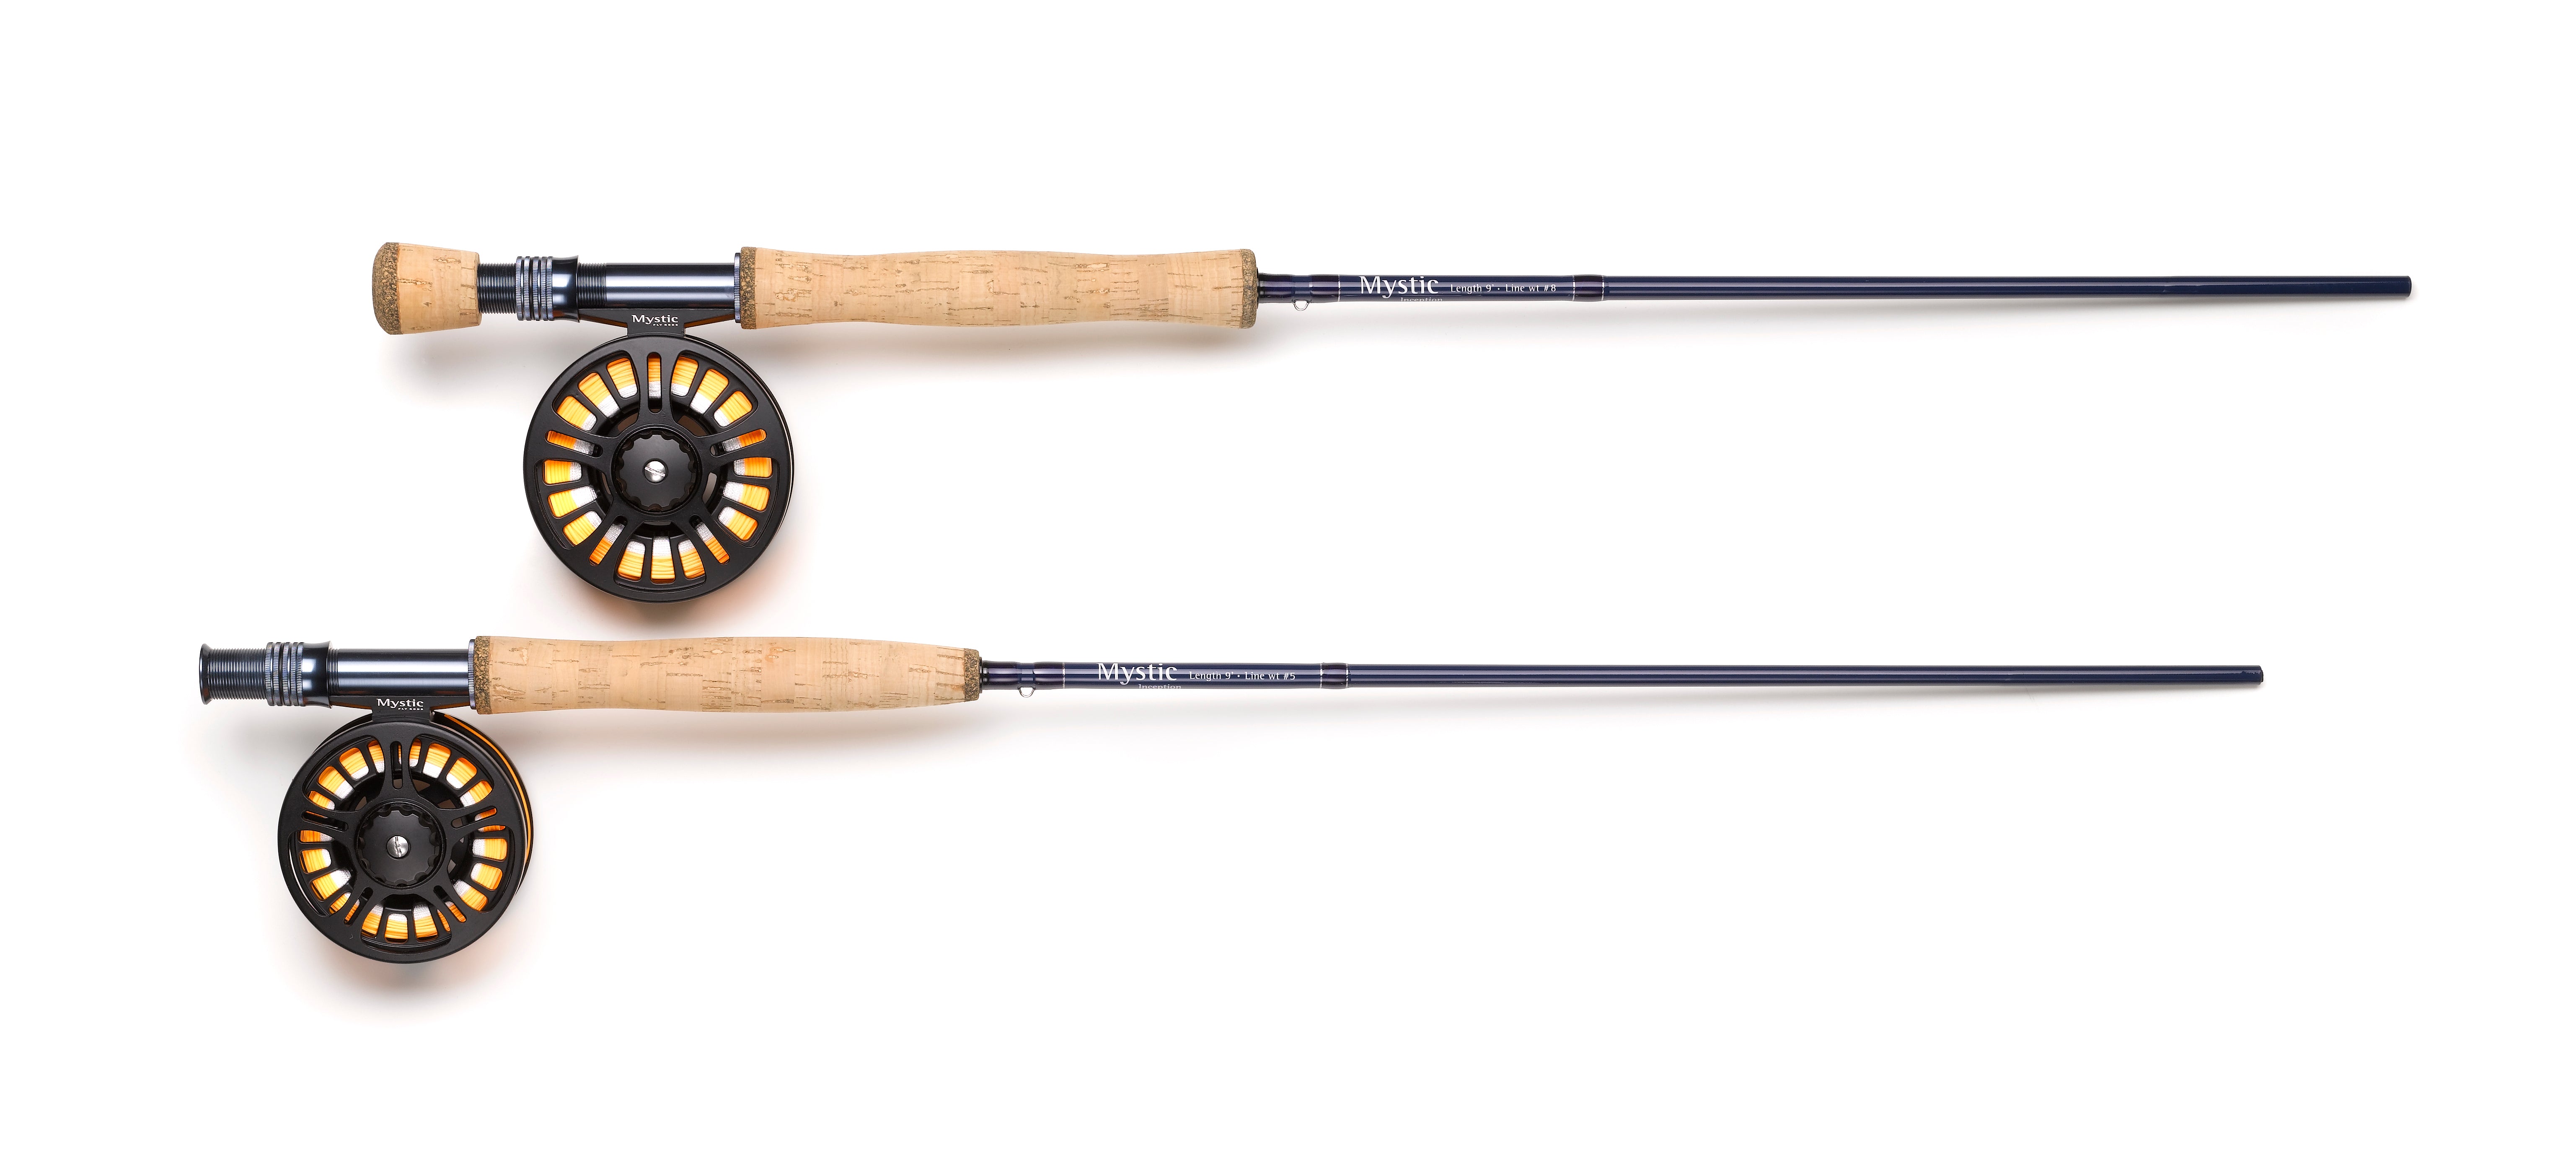 NEW Redington Crosswater Combo - Fly Rod, Reel & Line Outfit 9' 8